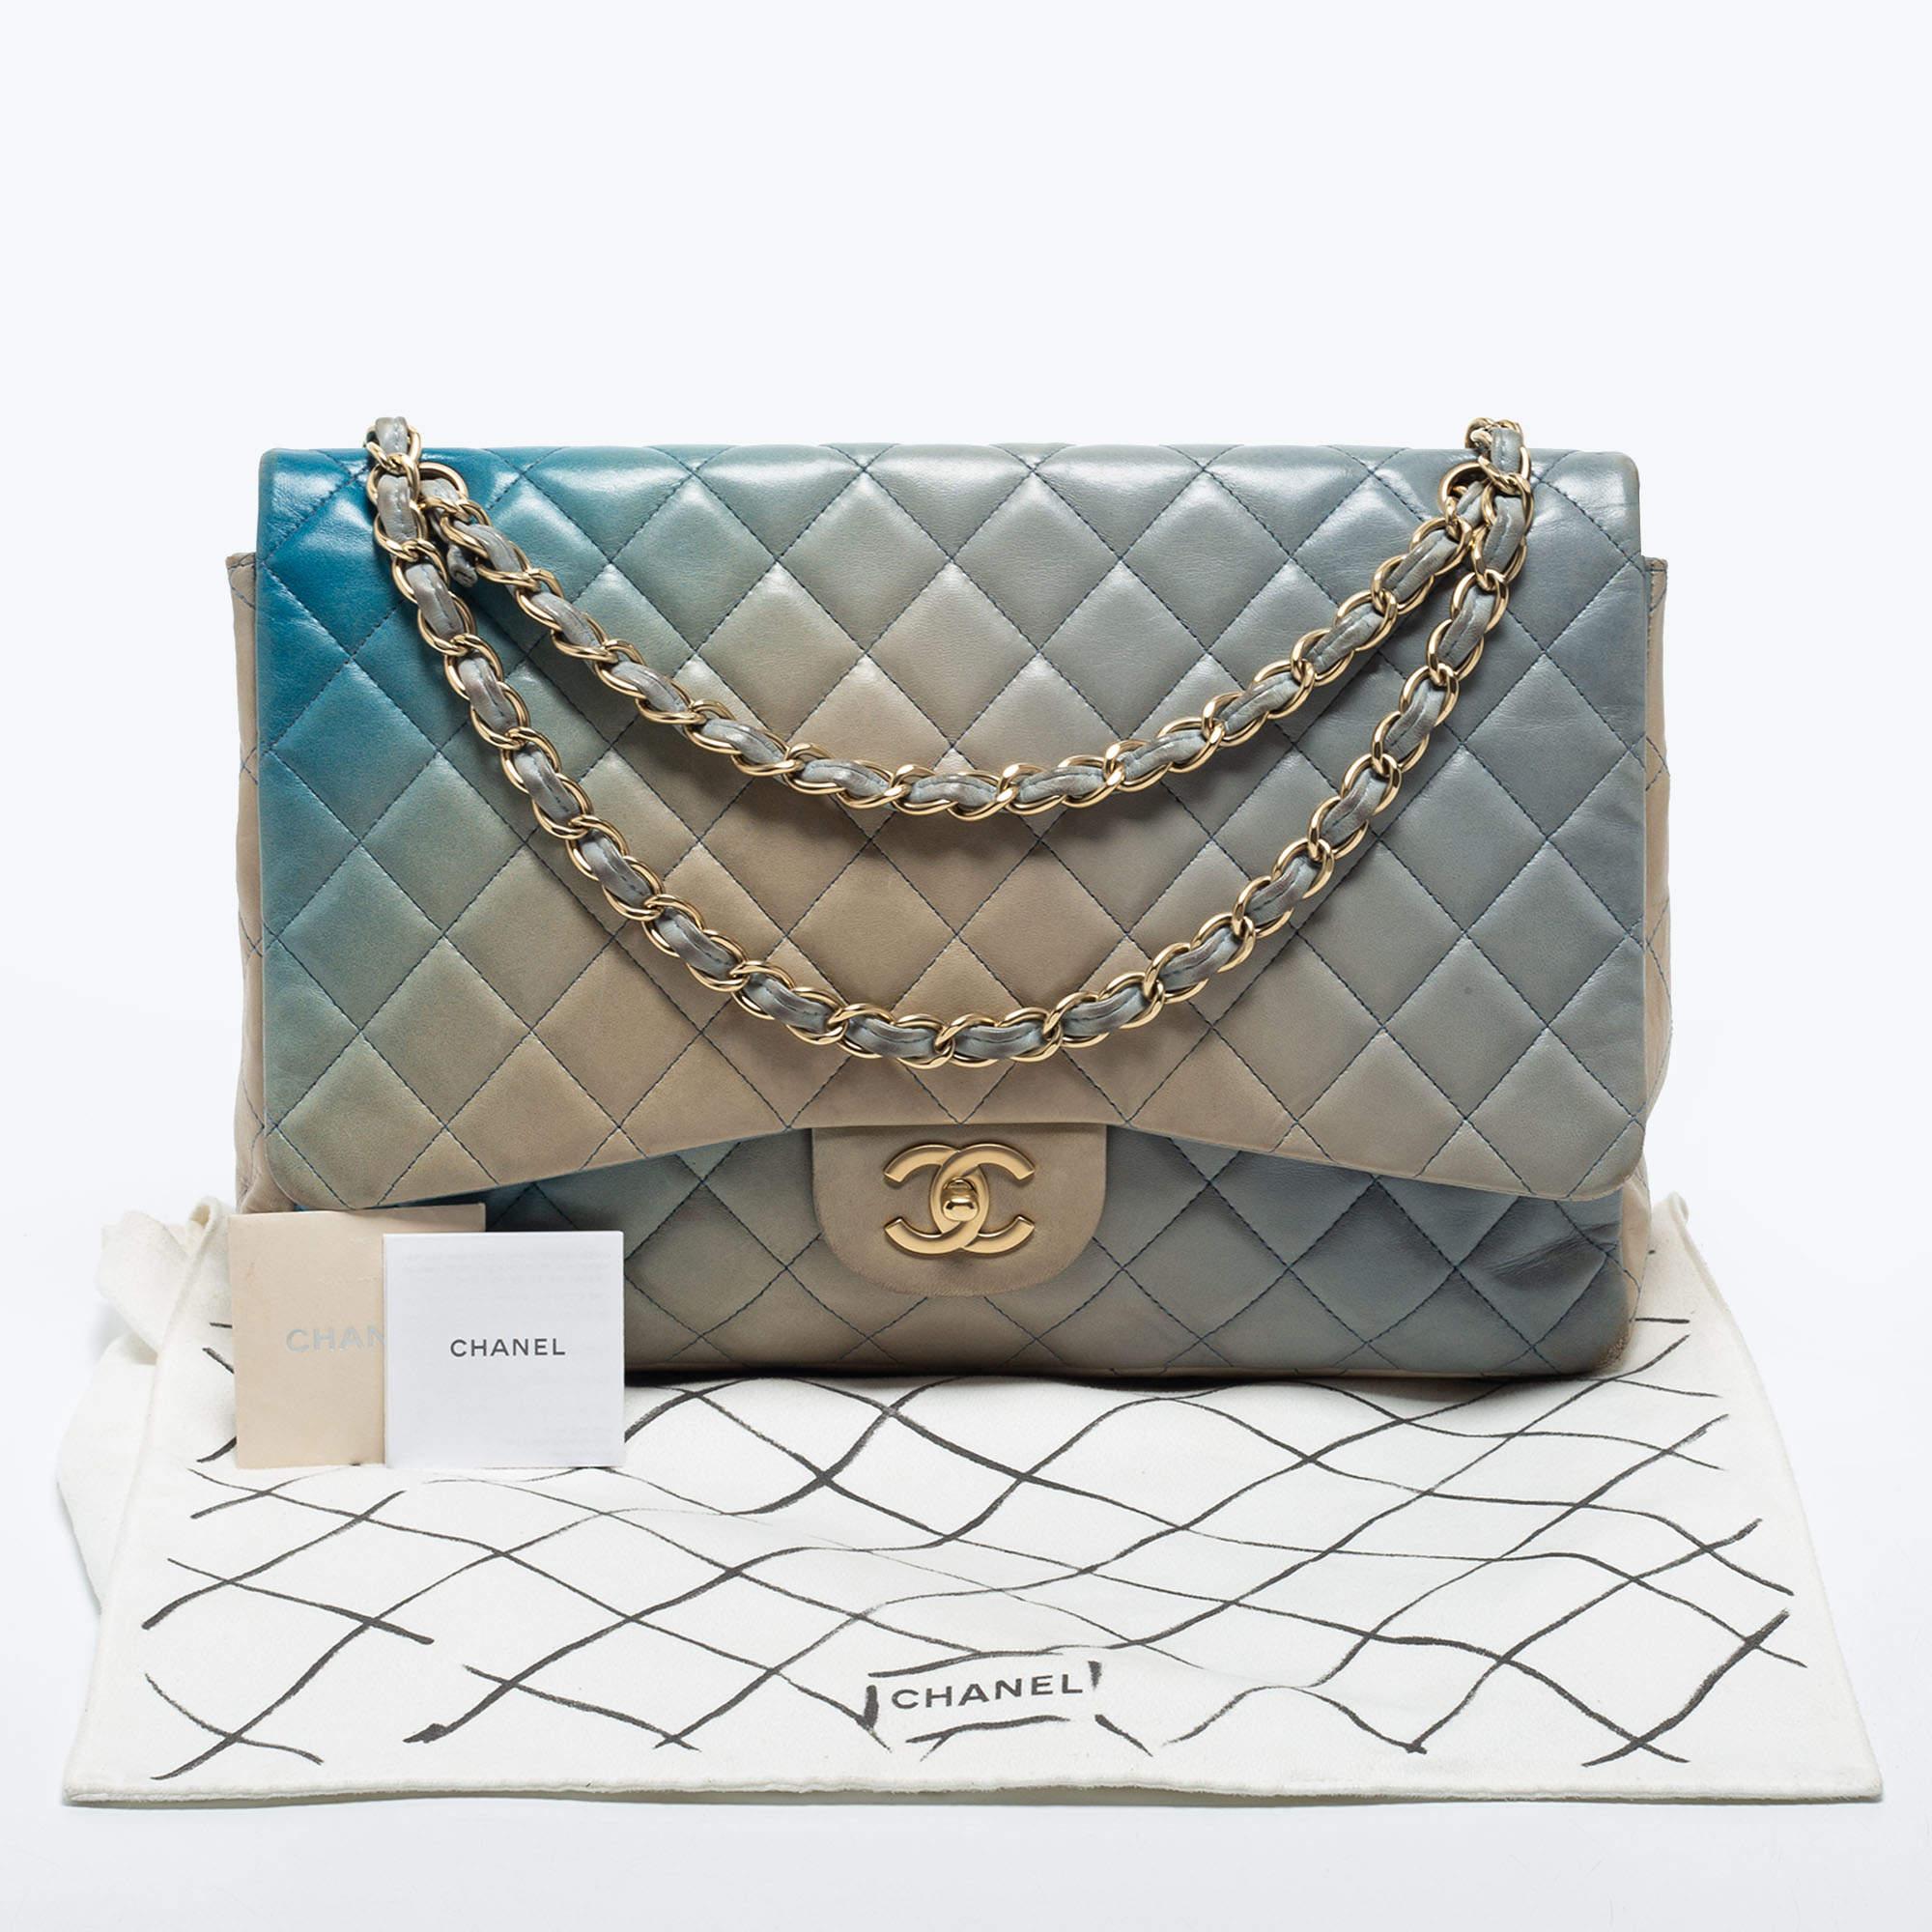 Chanel Ombre Blue Quilted Leather Maxi Classic Single Flap Shoulder Bag 7